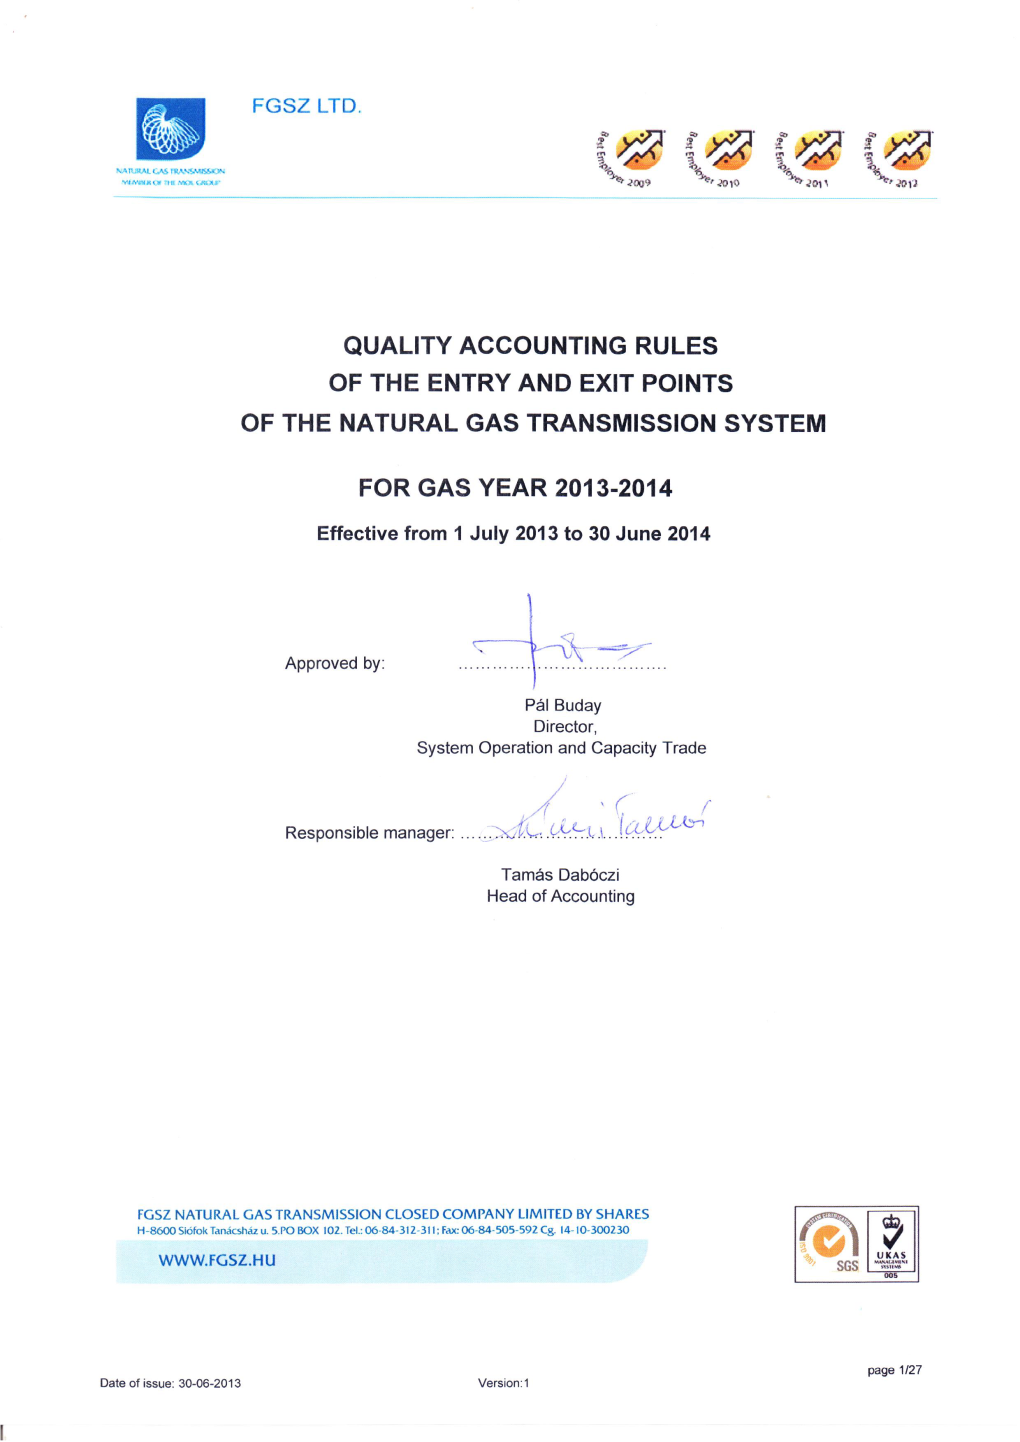 Quality Accounting Rules 2013